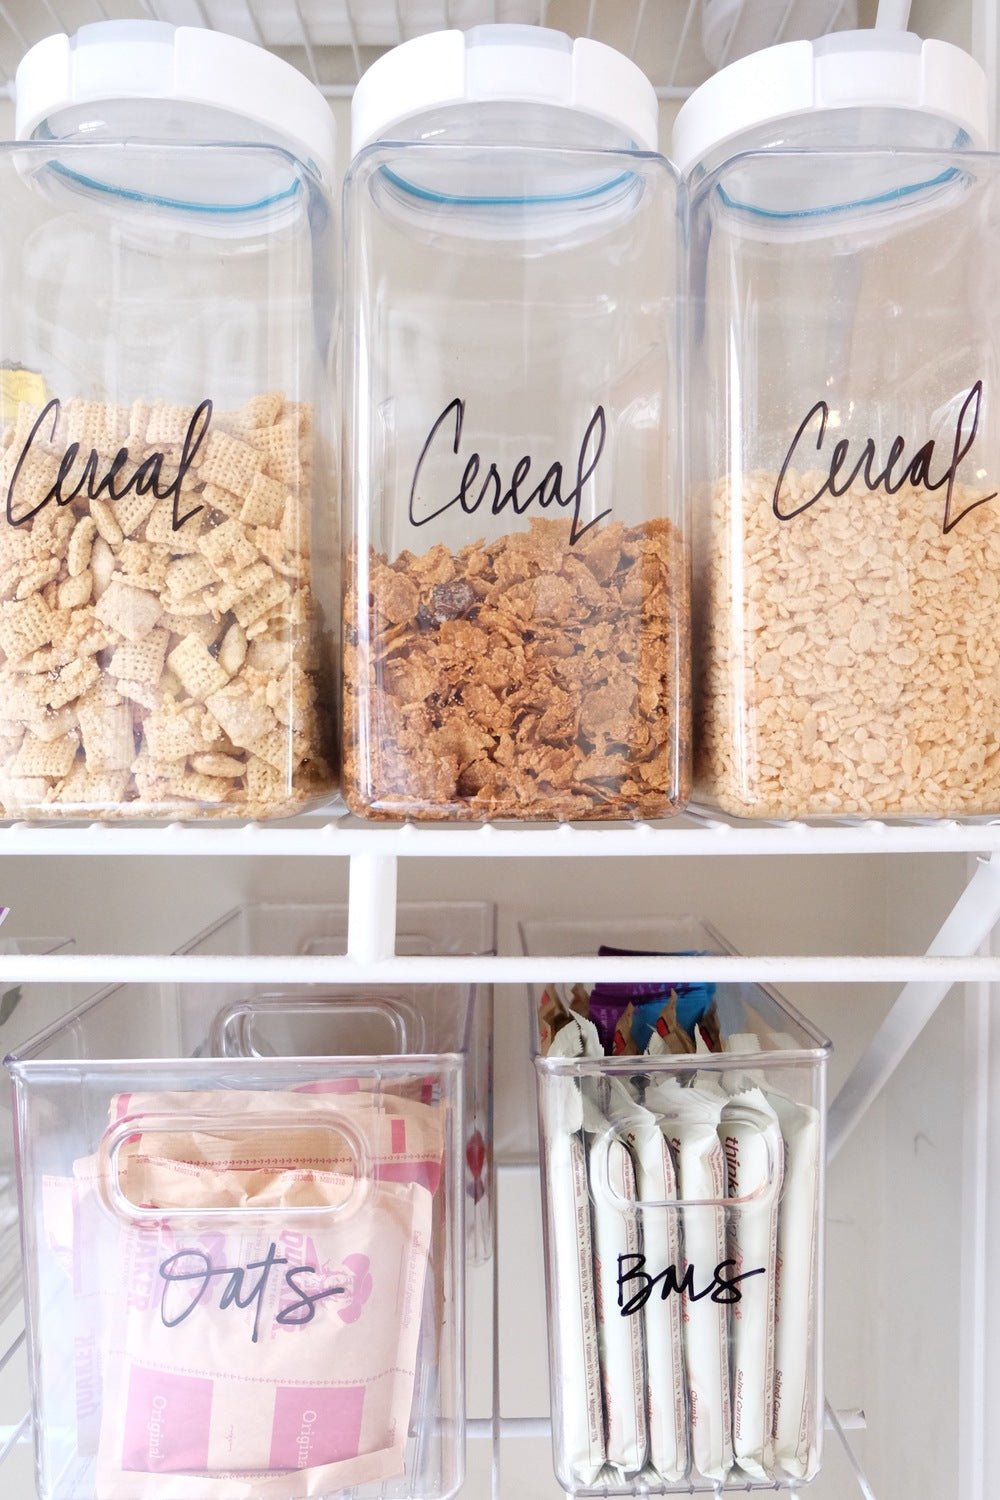 Pantry Tips With The Organizing Genius – The Home Edit